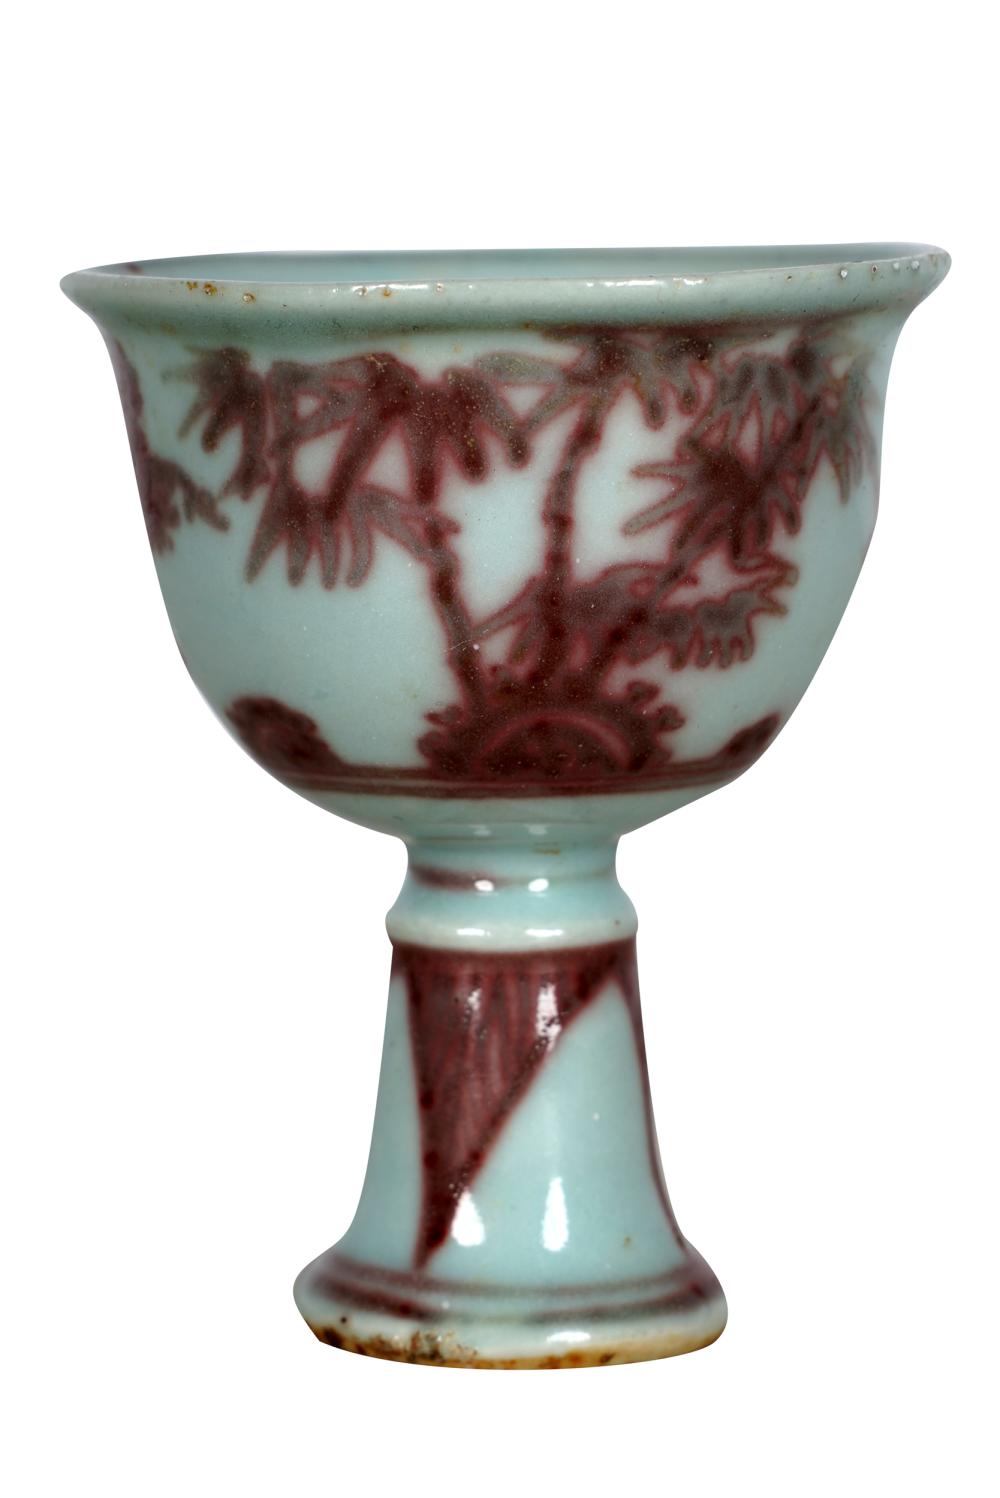 CHINSE RED & WHITE PORCELAIN FOOTED